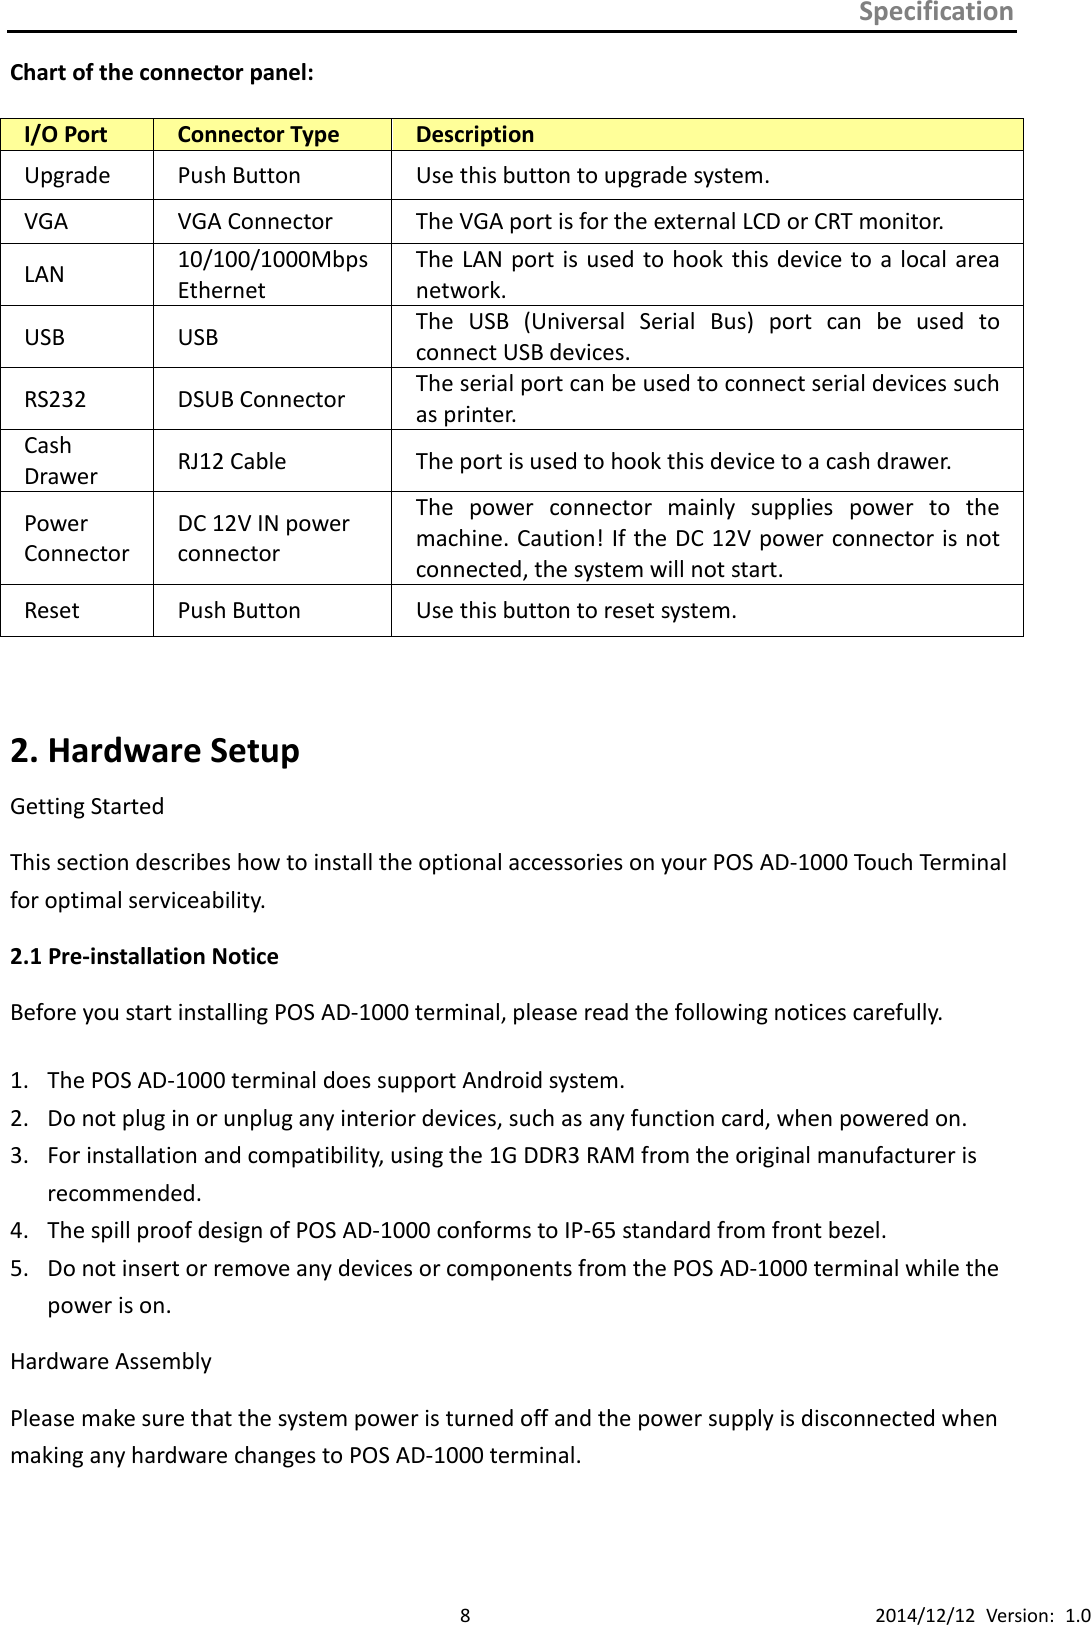 Specification      8 2014/12/12  Version:  1.0 Chart of the connector panel:  I/O Port Connector Type Description Upgrade Push Button Use this button to upgrade system. VGA VGA Connector The VGA port is for the external LCD or CRT monitor. LAN 10/100/1000Mbps Ethernet The LAN port is used  to hook  this device to a local area network. USB USB The  USB  (Universal  Serial  Bus)  port  can  be  used  to connect USB devices. RS232 DSUB Connector The serial port can be used to connect serial devices such as printer. Cash Drawer RJ12 Cable The port is used to hook this device to a cash drawer. Power Connector DC 12V IN power connector The  power  connector  mainly  supplies  power  to  the machine. Caution! If the DC 12V power connector is not connected, the system will not start. Reset Push Button Use this button to reset system.  2. Hardware Setup Getting Started This section describes how to install the optional accessories on your POS AD-1000 Touch Terminal for optimal serviceability. 2.1 Pre-installation Notice Before you start installing POS AD-1000 terminal, please read the following notices carefully.  1. The POS AD-1000 terminal does support Android system. 2. Do not plug in or unplug any interior devices, such as any function card, when powered on. 3. For installation and compatibility, using the 1G DDR3 RAM from the original manufacturer is recommended. 4. The spill proof design of POS AD-1000 conforms to IP-65 standard from front bezel. 5. Do not insert or remove any devices or components from the POS AD-1000 terminal while the power is on. Hardware Assembly Please make sure that the system power is turned off and the power supply is disconnected when making any hardware changes to POS AD-1000 terminal.  